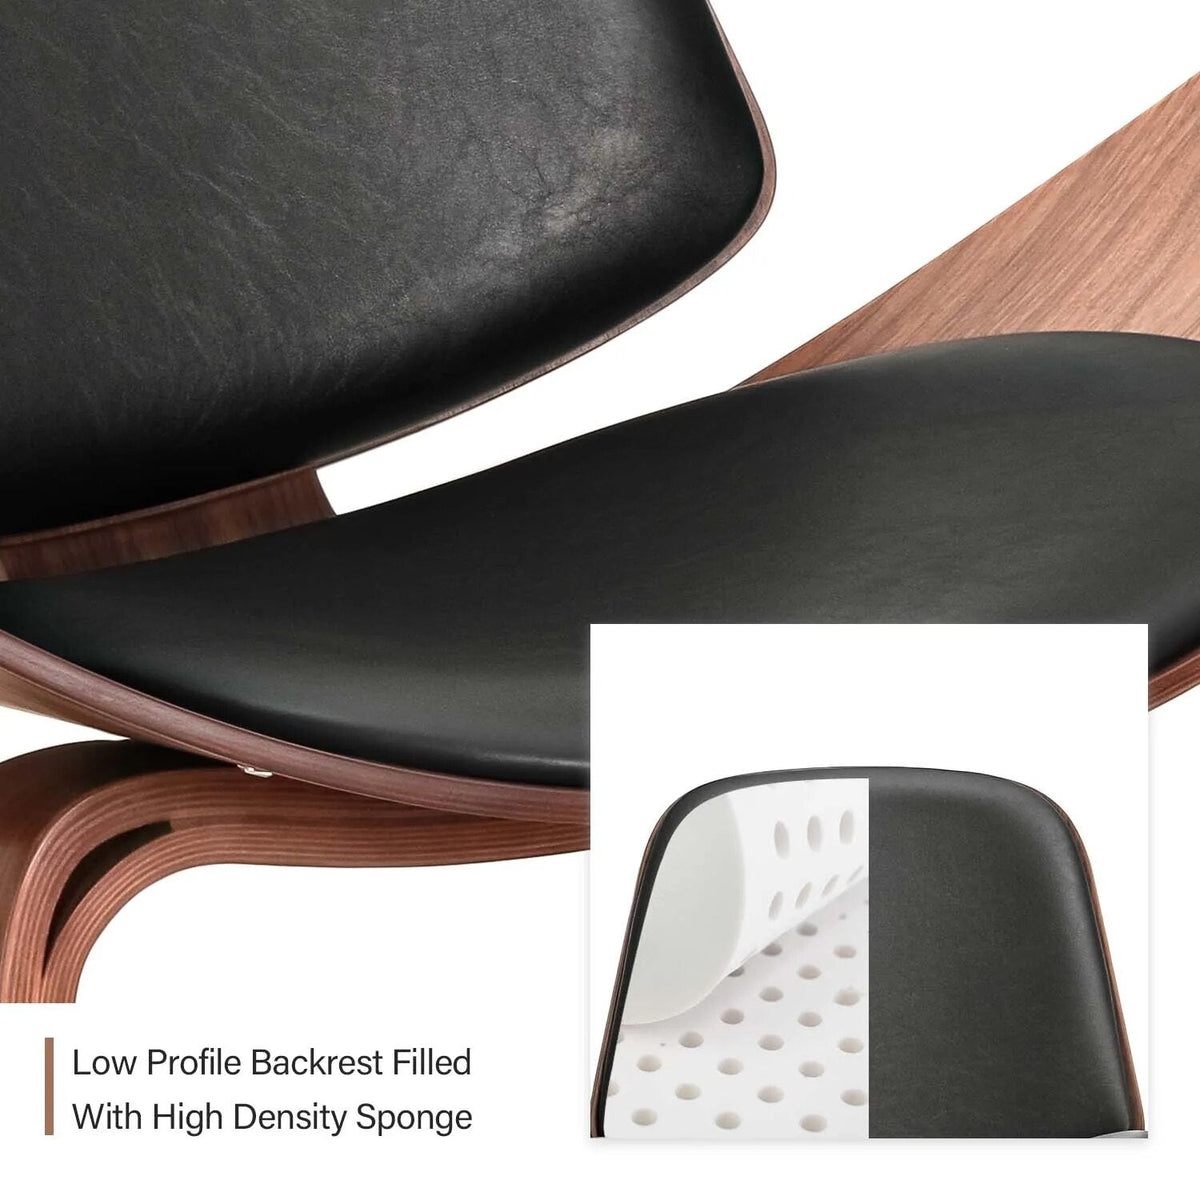 Obsidian Oasis Lounge Wood Vegan Leather Chair | Hypoallergenic - Allergy Friendly - Naturally Free